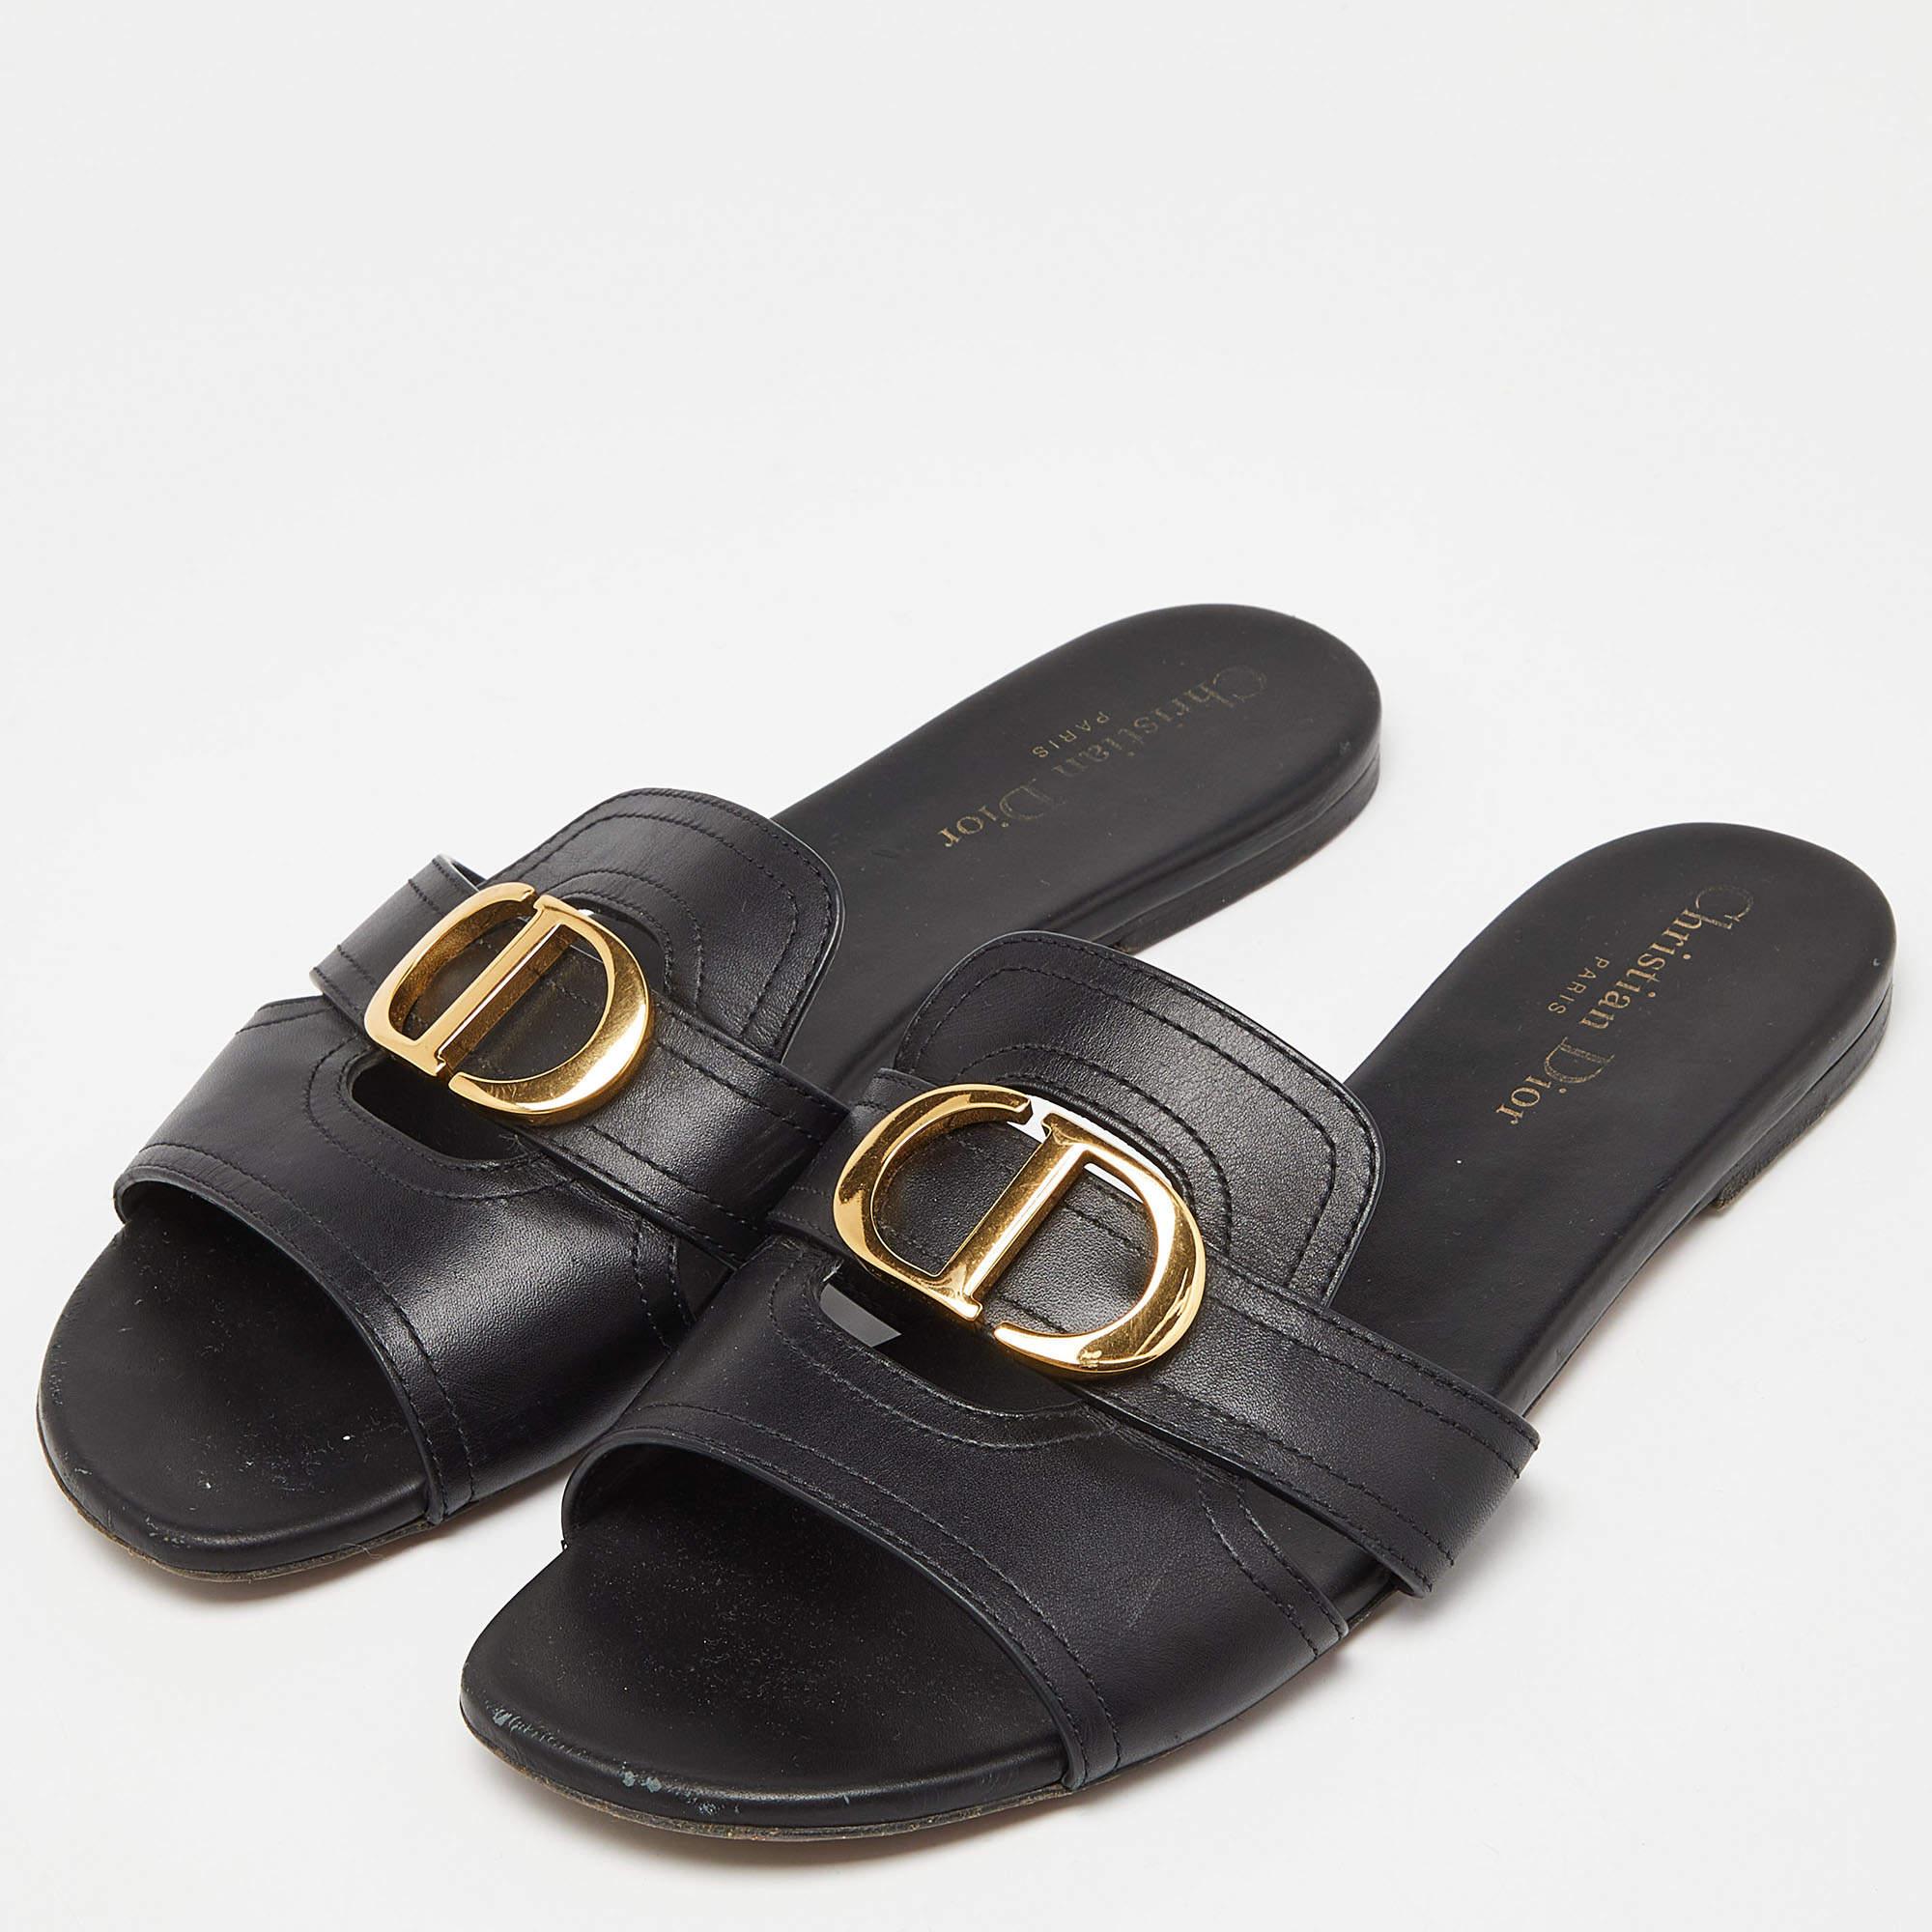 These sandals will frame your feet in an elegant manner. Crafted from quality materials, they display a classy design and comfortable insoles.

Includes: Original Dustbag